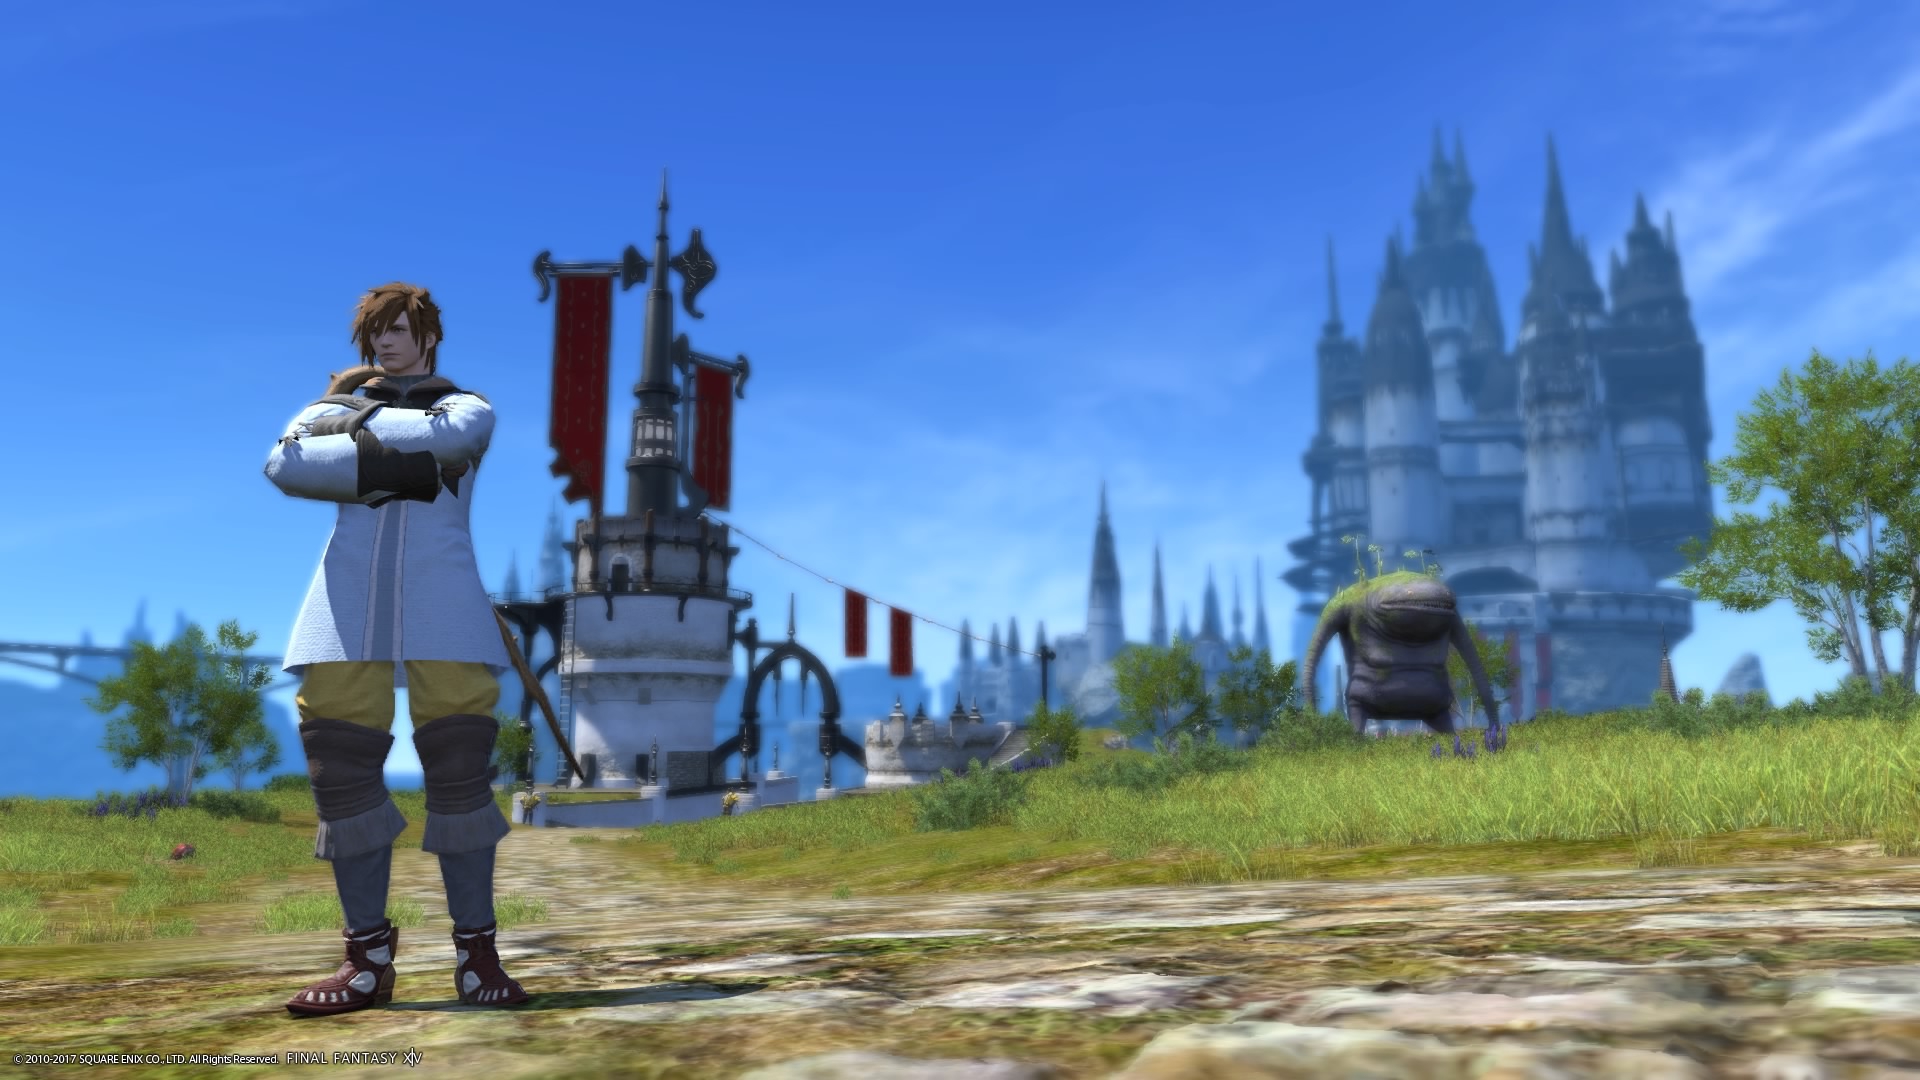 Outside Limsa Lominsa currently playing as a White Mage.